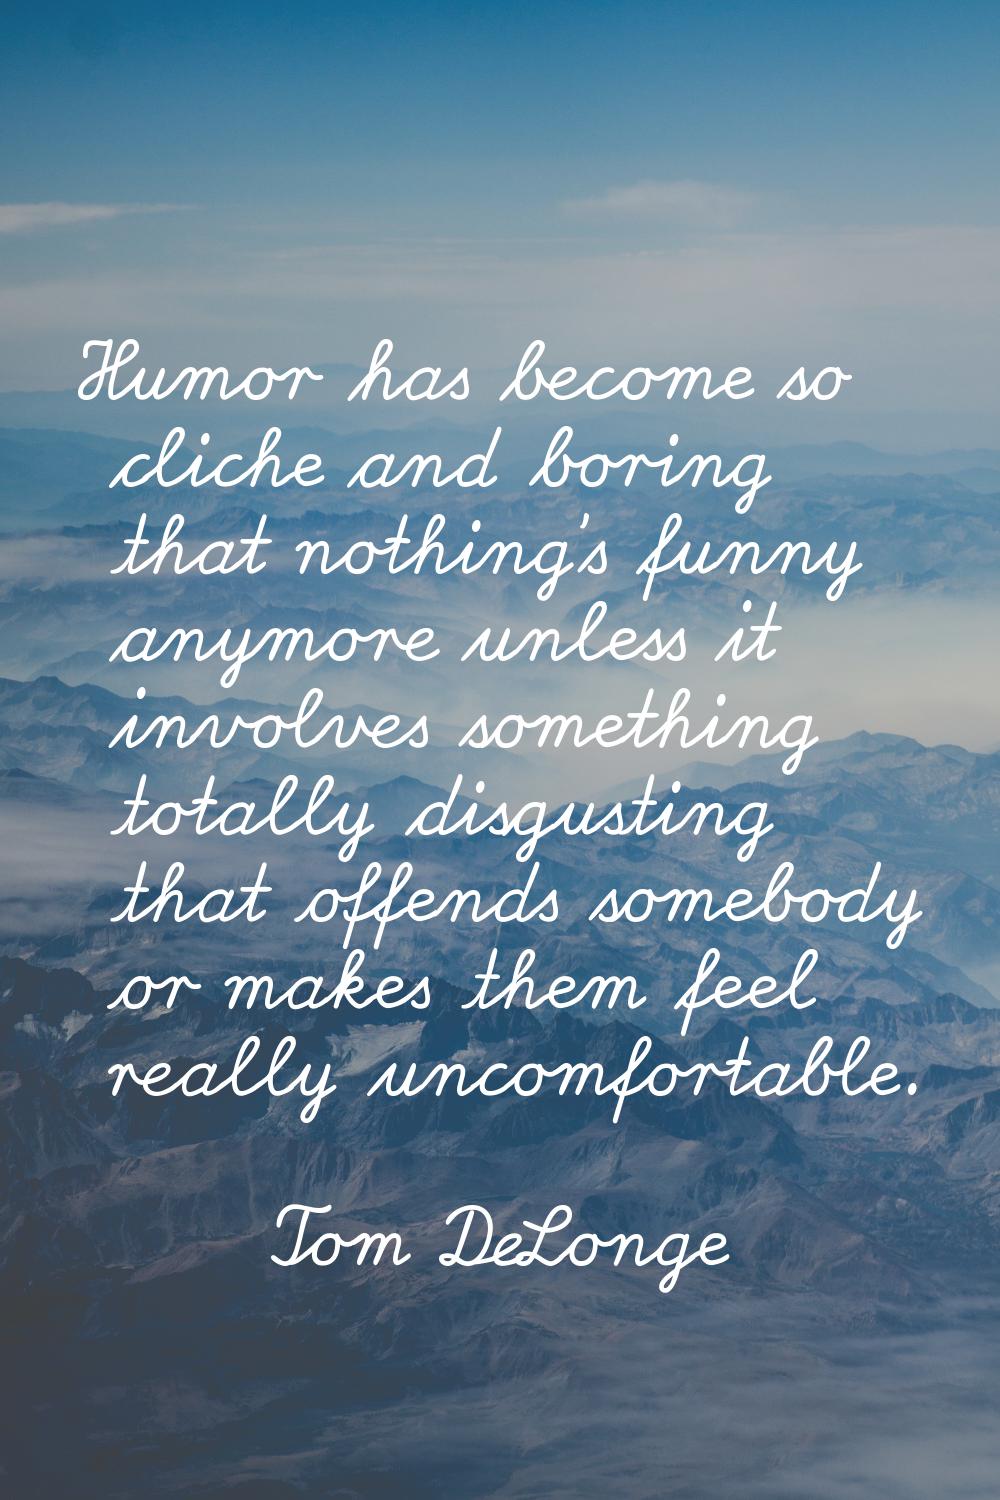 Humor has become so cliche and boring that nothing's funny anymore unless it involves something tot